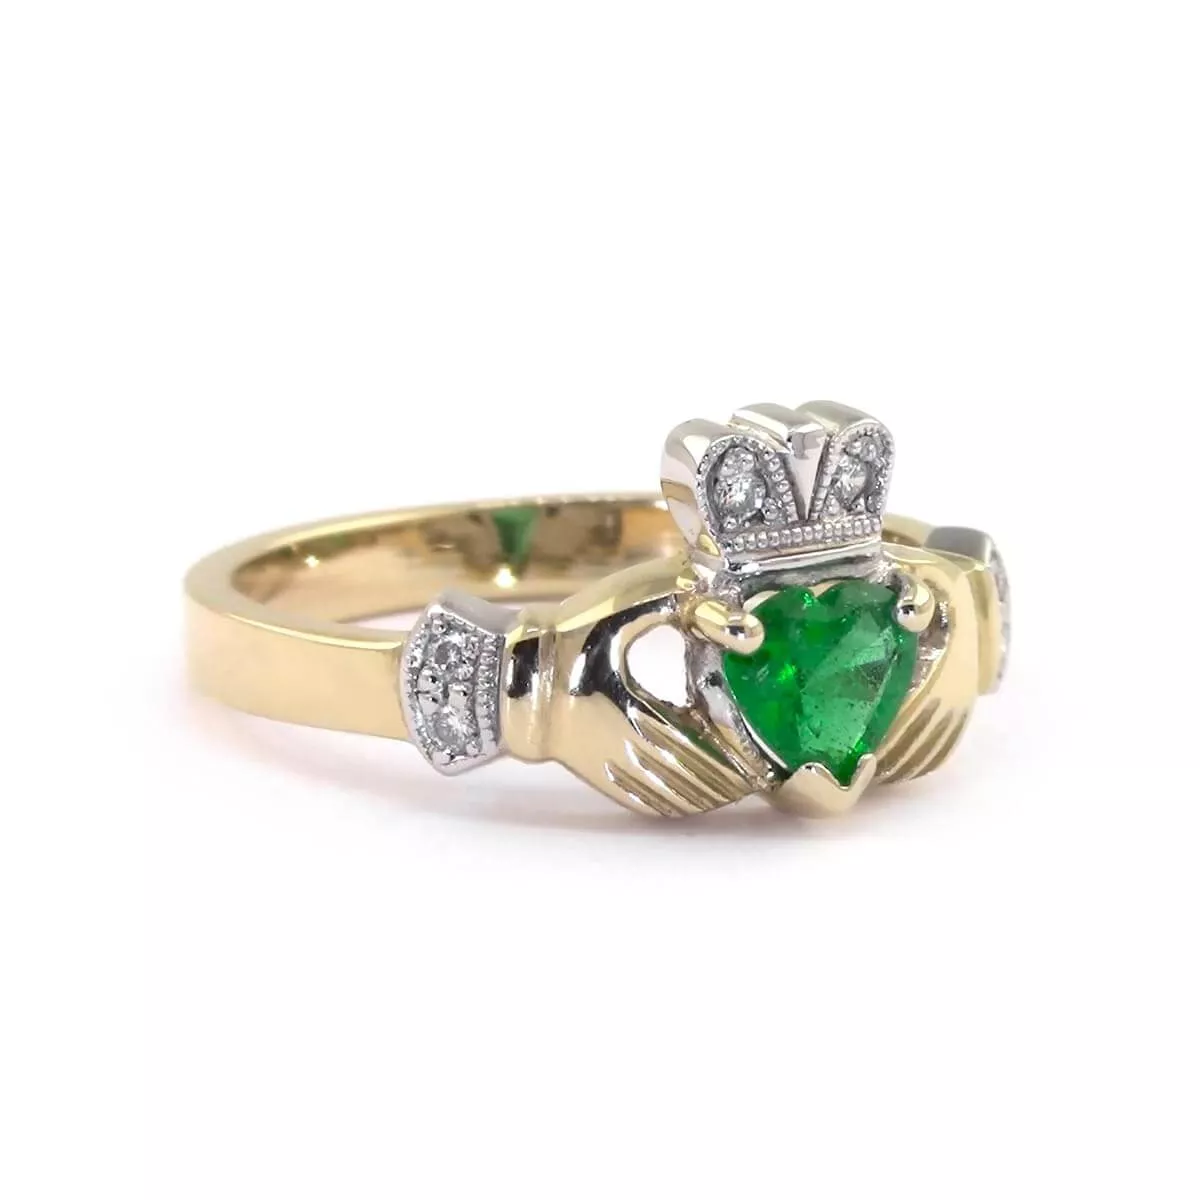 5 Claddagh Ring With Emerald 5 5